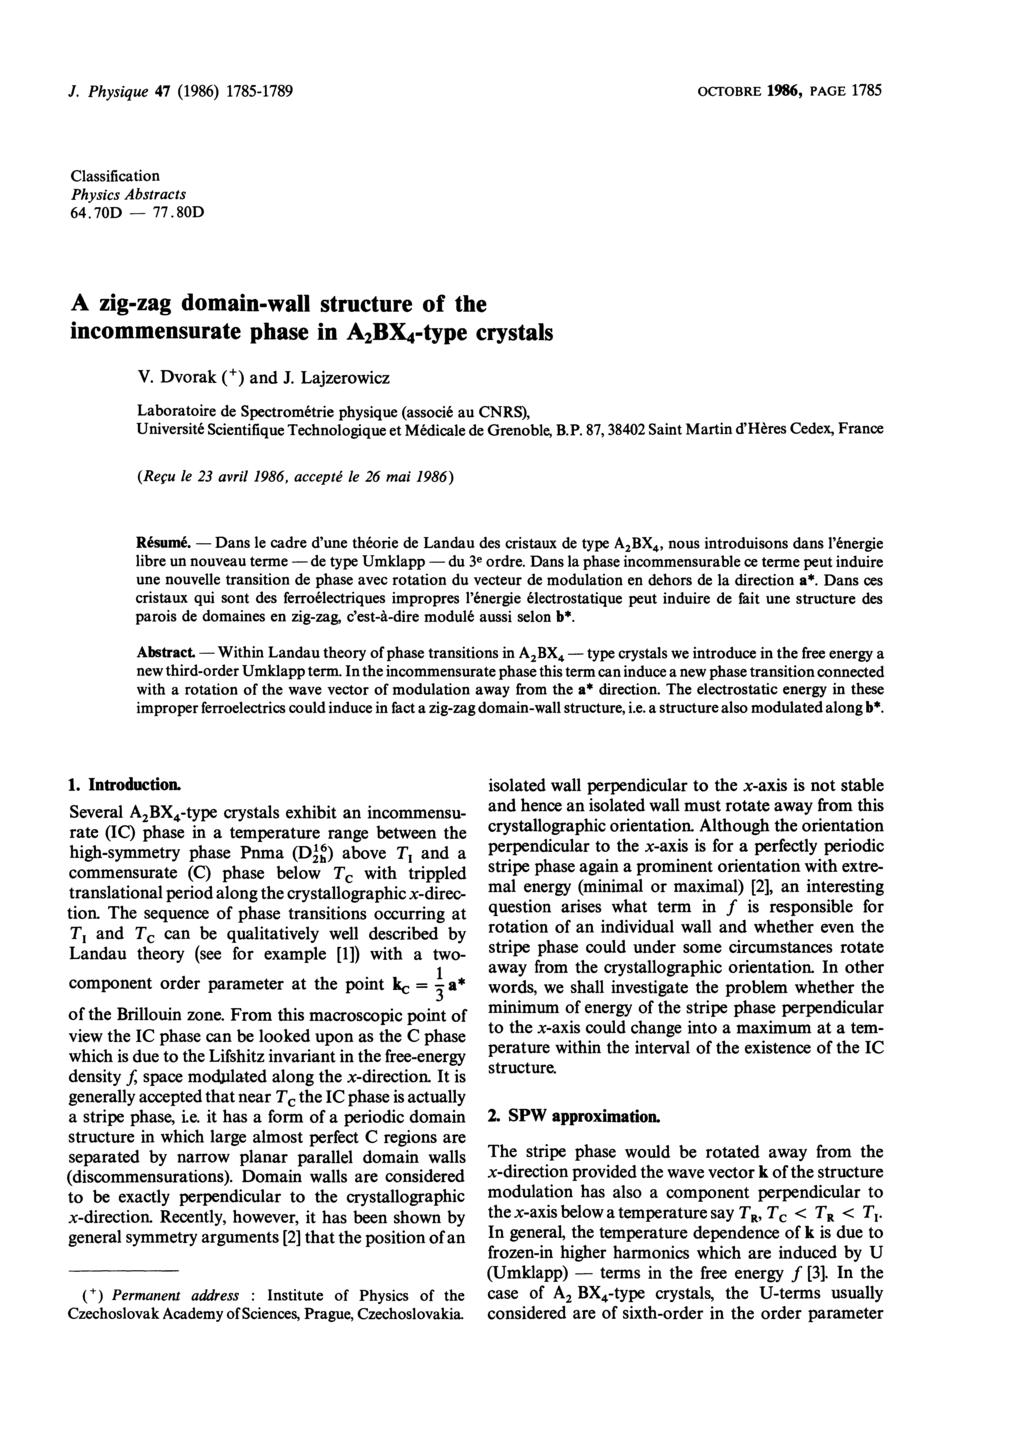 Dans de J. Physique 47 (1986) 1785-1789 OCTOBRE 1986, 1785 Classification Physics Abstracts 64.70D - 77.80D A zig-zag domain-wall structure of the incommensurate phase in A2BX4-type crystals V.